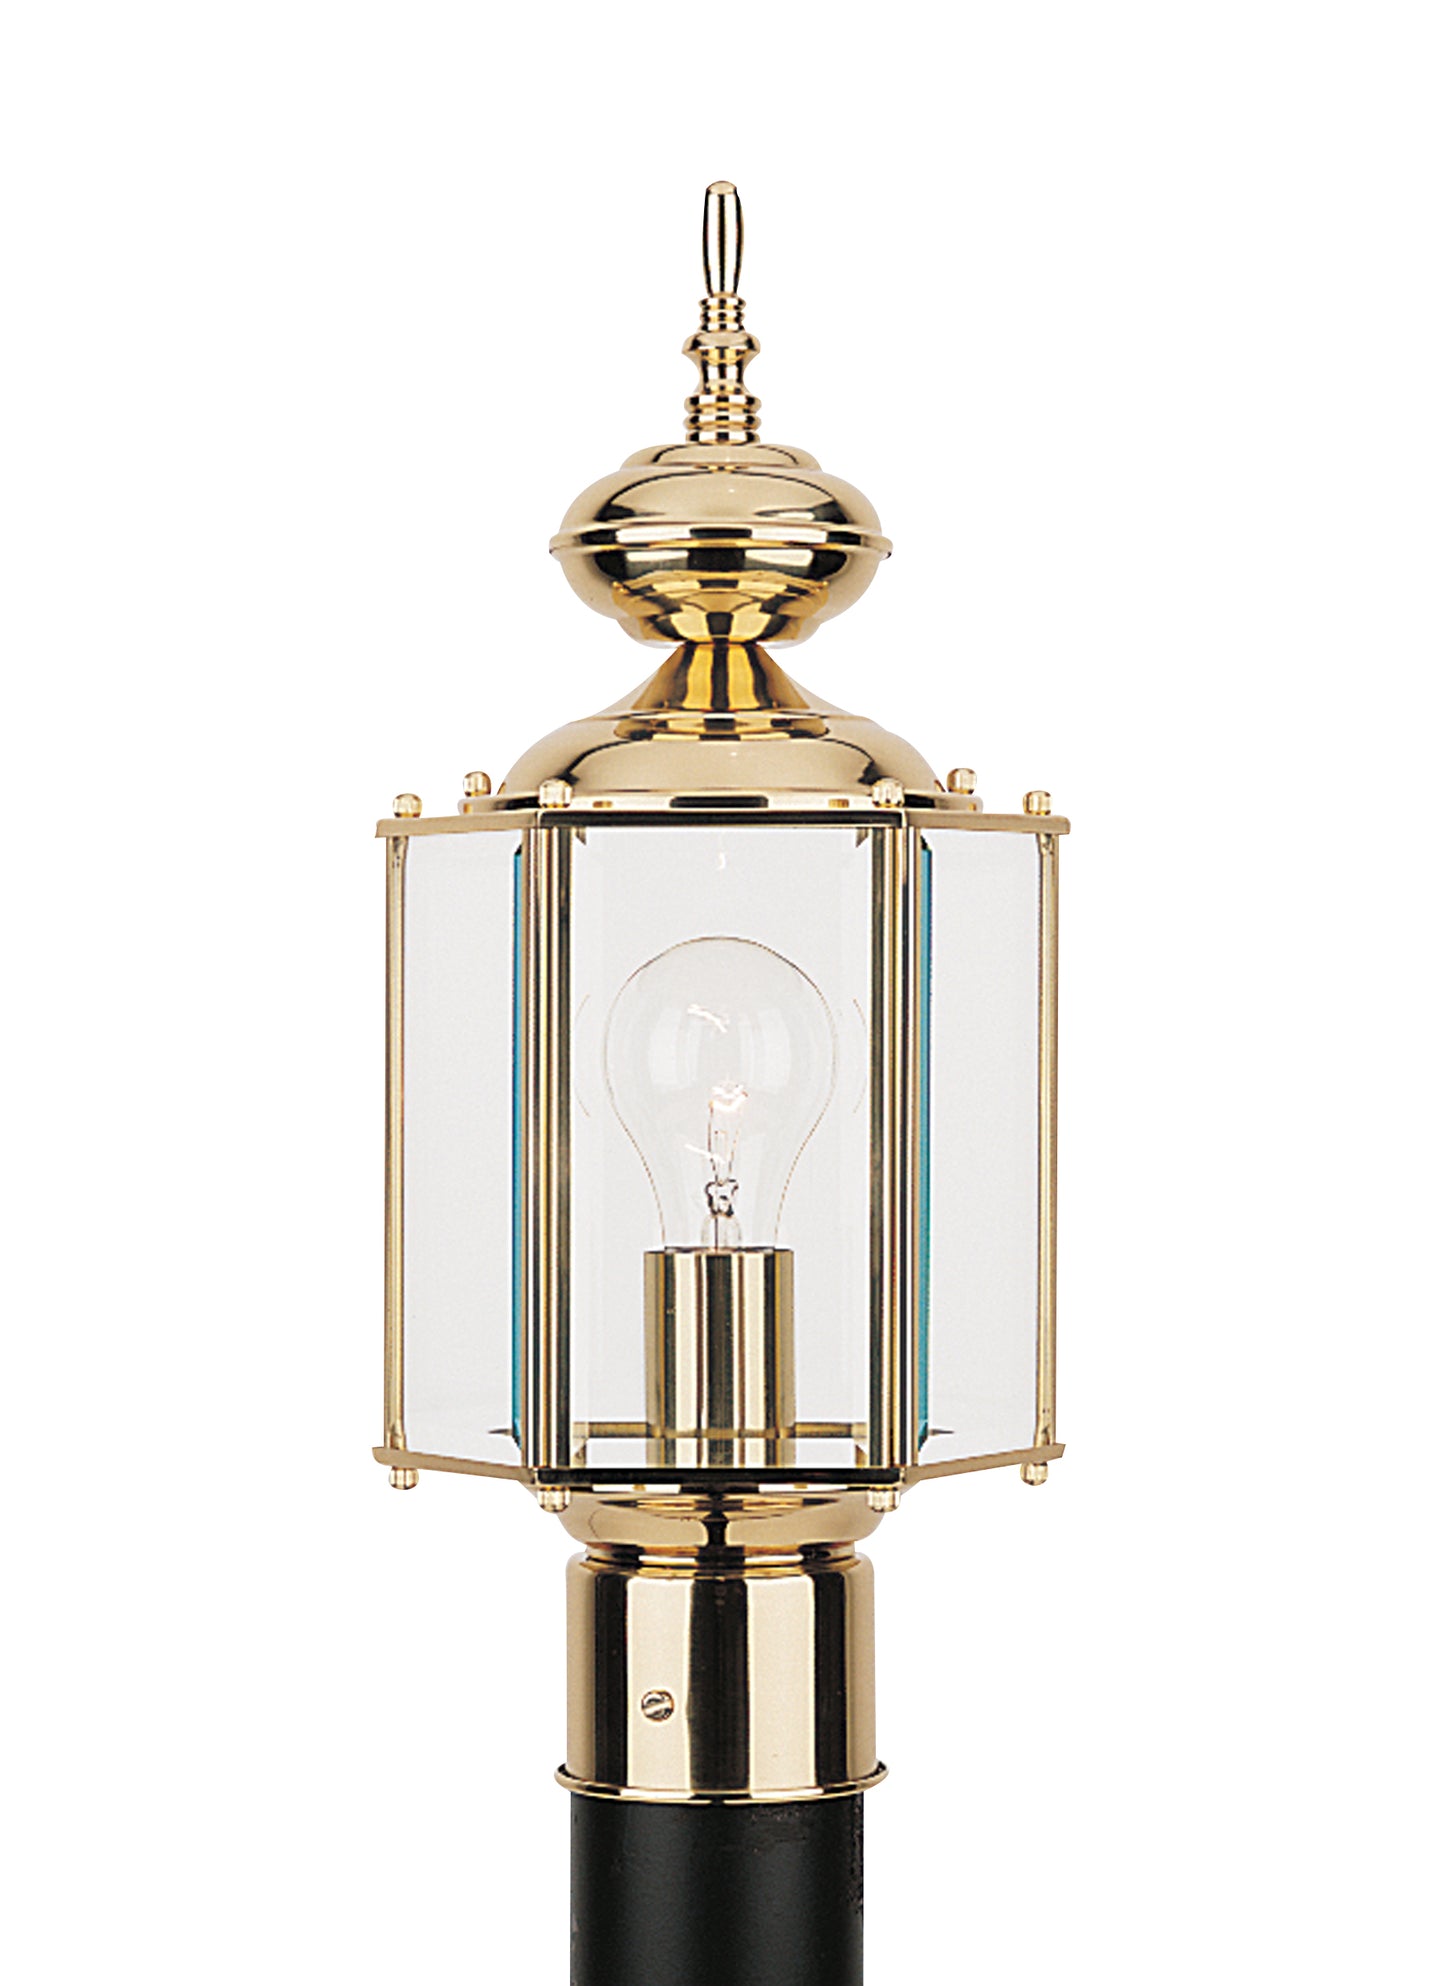 Classico traditional 1-light outdoor exterior post lantern in polished brass gold finish with clear beveled glass panels